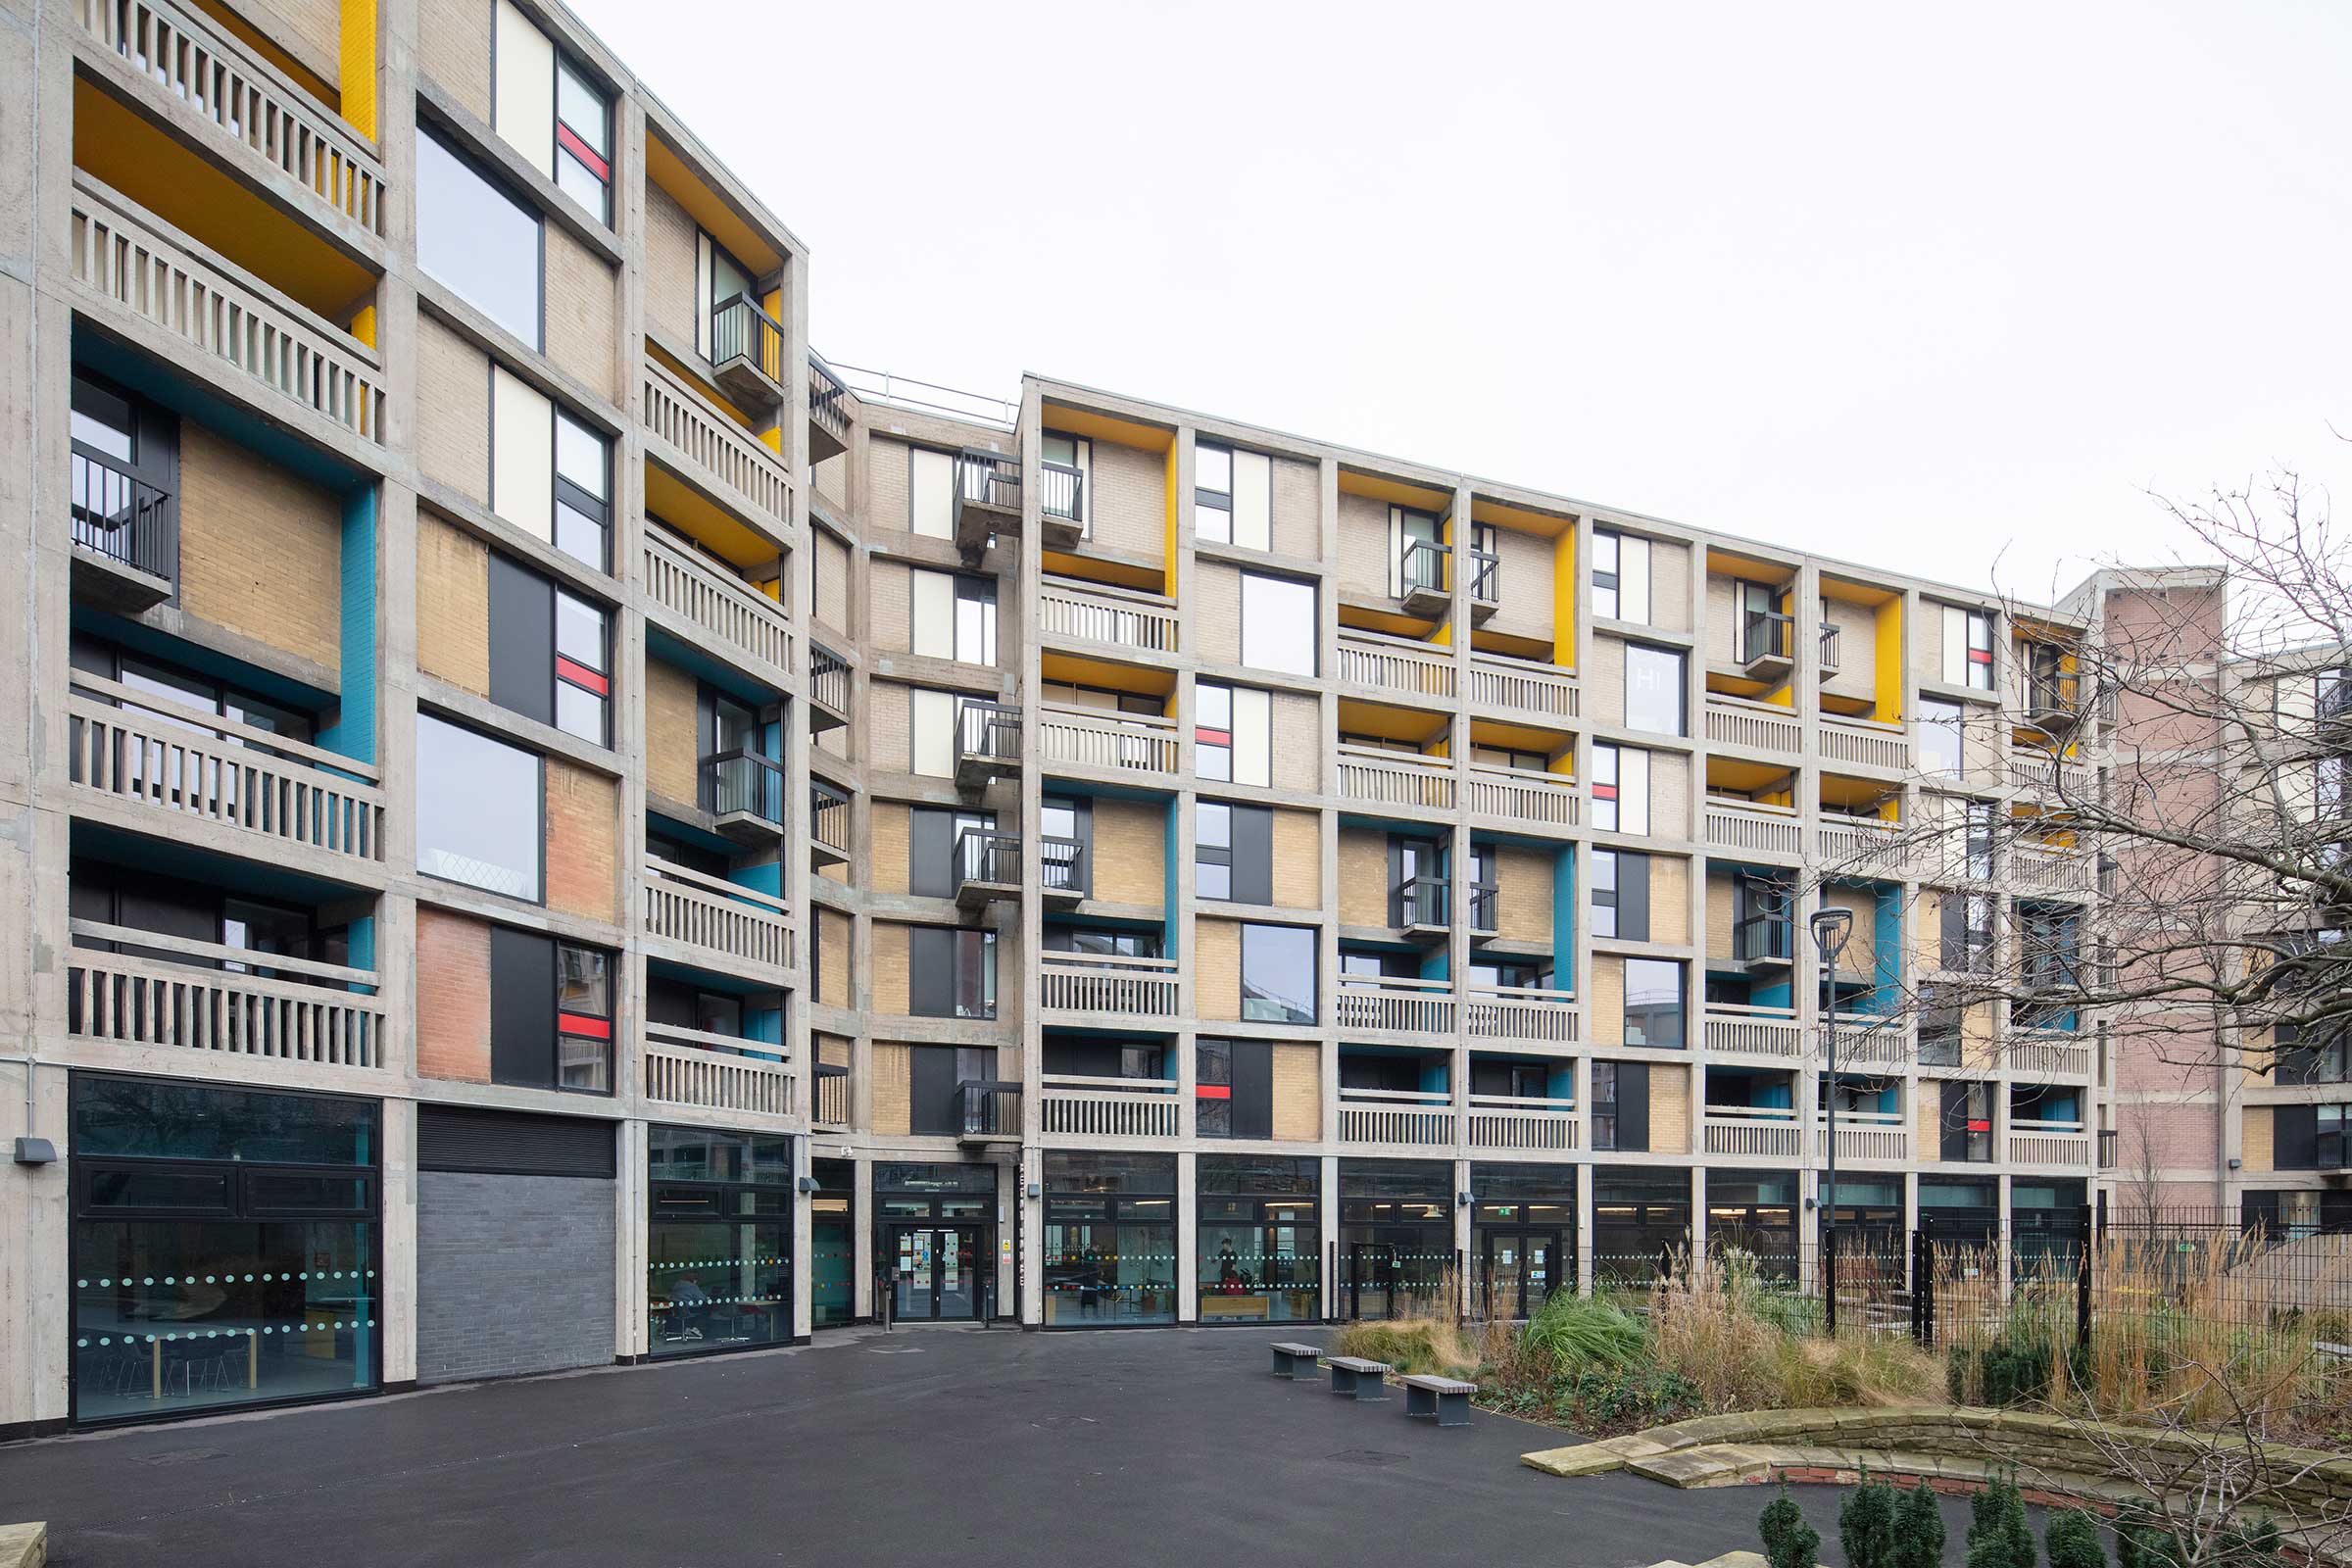 the external of a brutalist apartment block that has been refurbished with new aluminium windows. There are blocks of blue, red and yellow infill panes to the sides of the building.